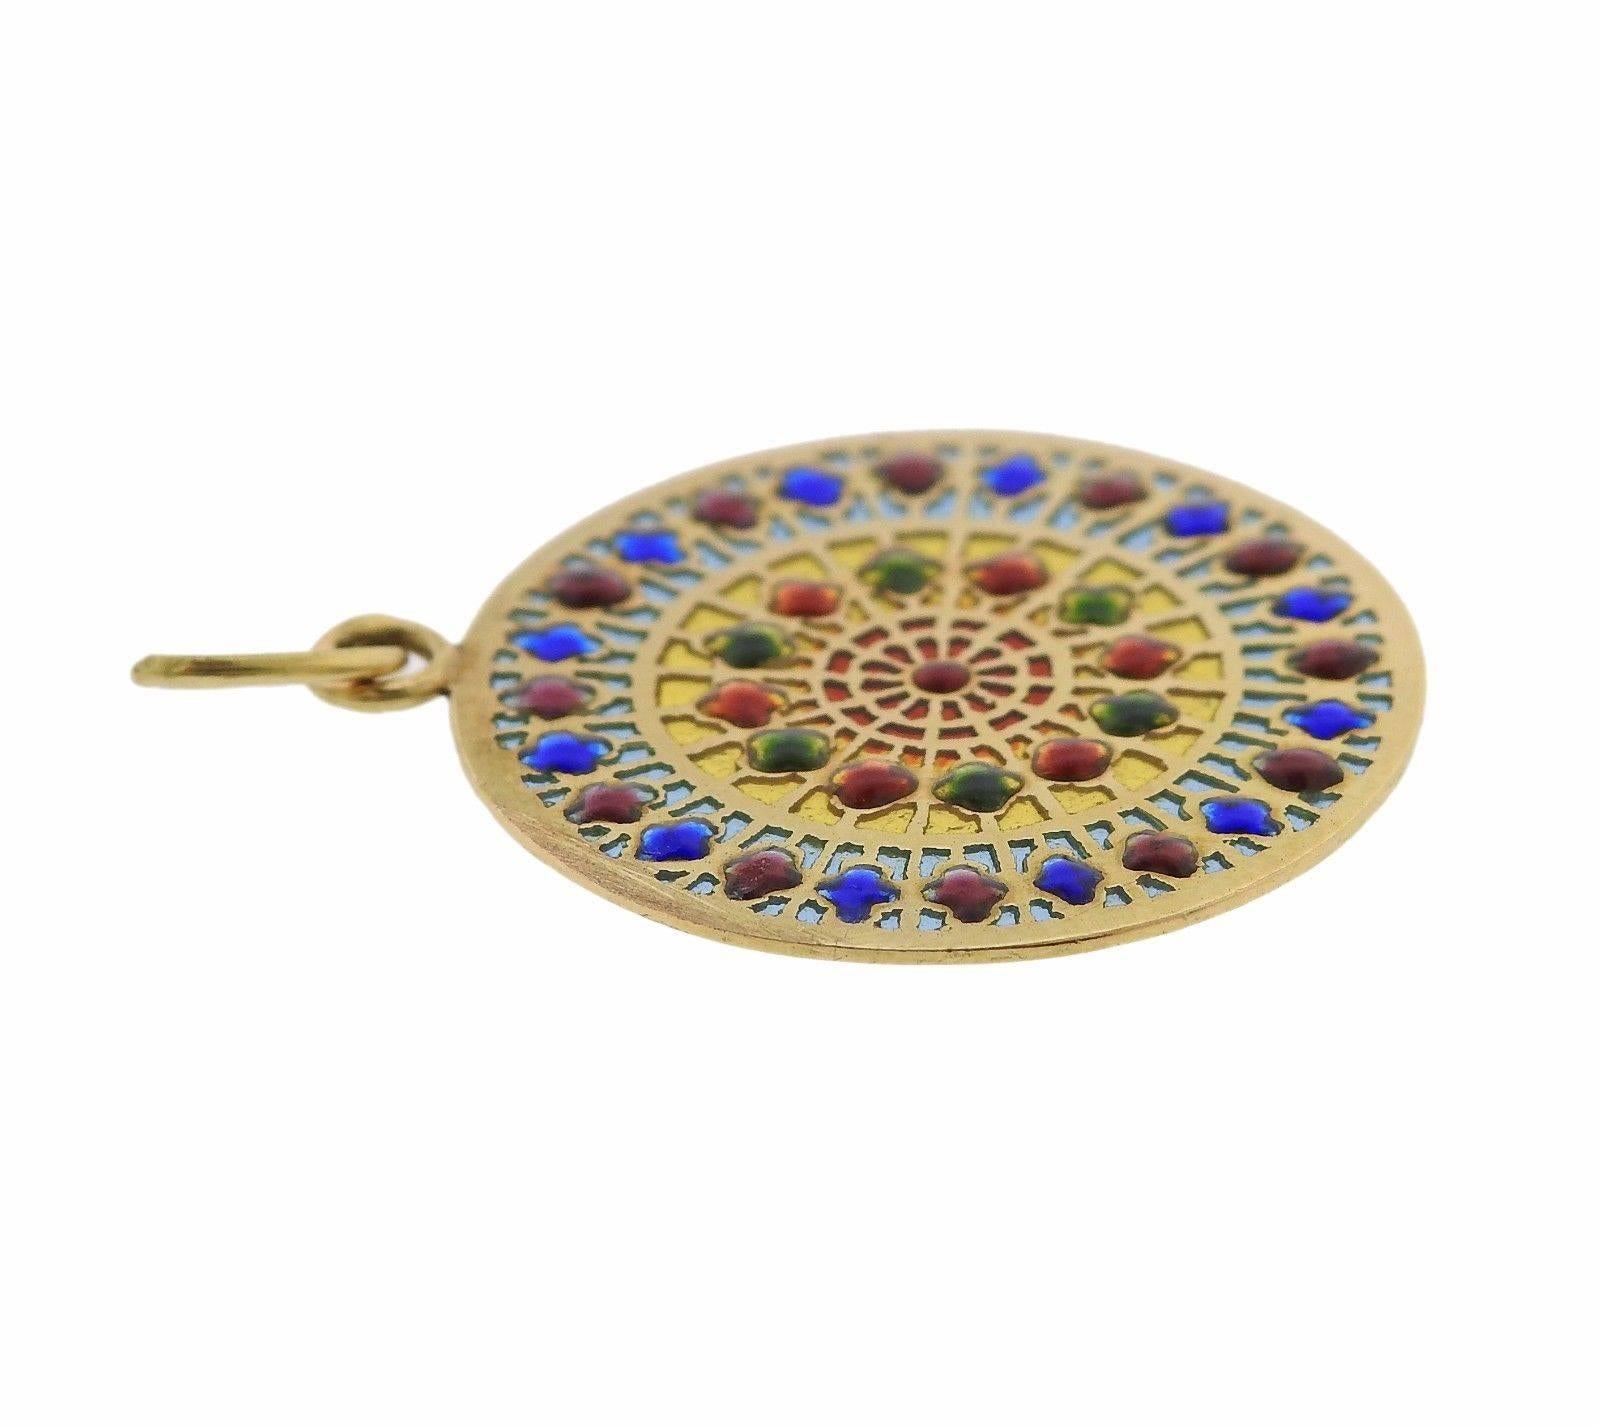 An 18k yellow gold pendant adorned with enamel stained glass.  The pendant measures 23.5mm in diameter and weighs 2.2 grams.  Marked: French Eagle assay mark.